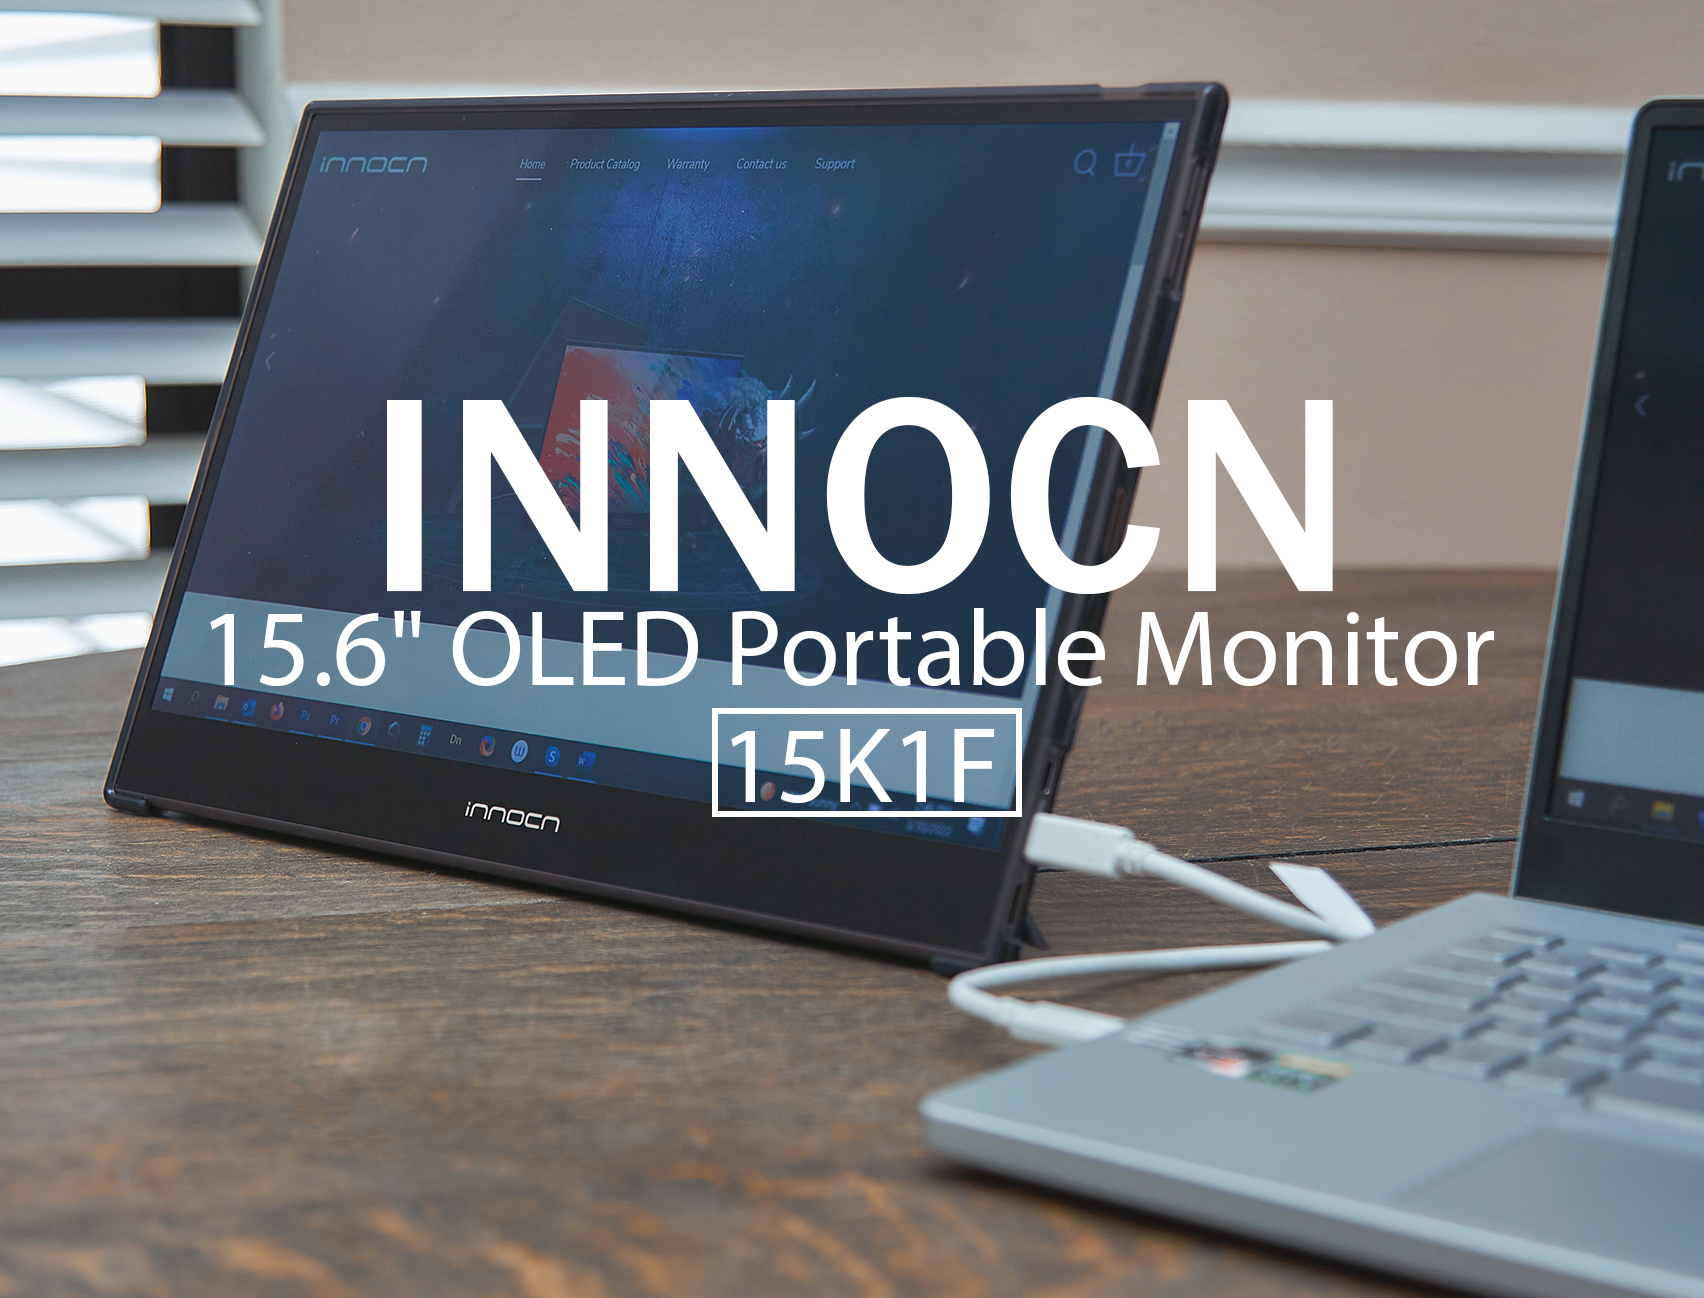 INNOCN 15K1F 15.6 inch OLED portable monitor review - The Gadgeteer